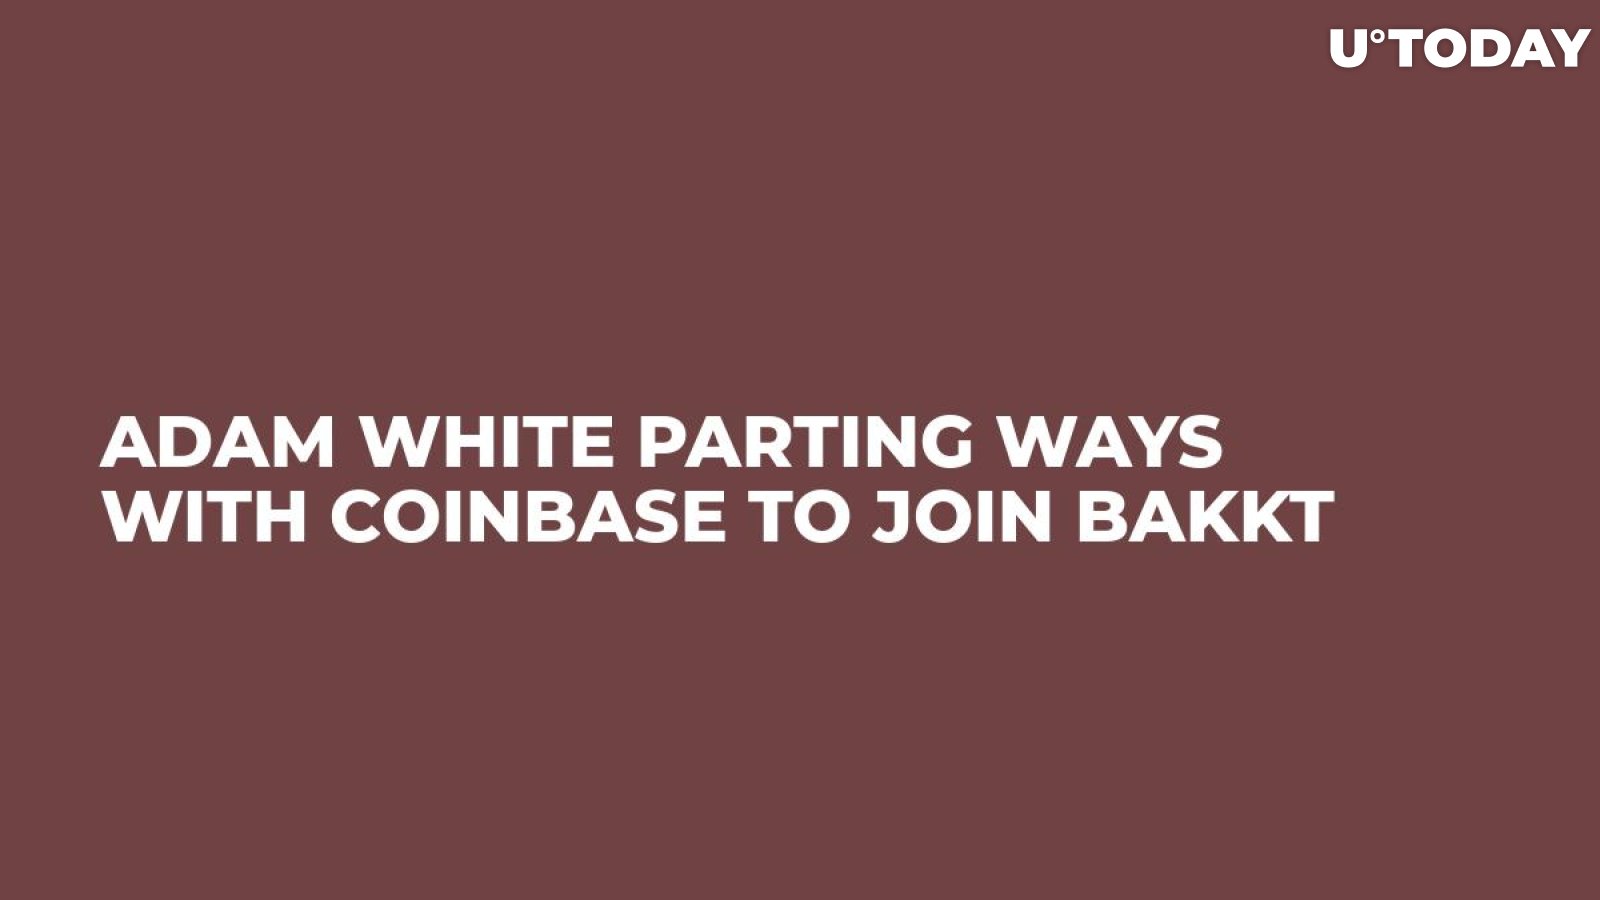 Adam White Parting Ways With Coinbase to Join Bakkt 